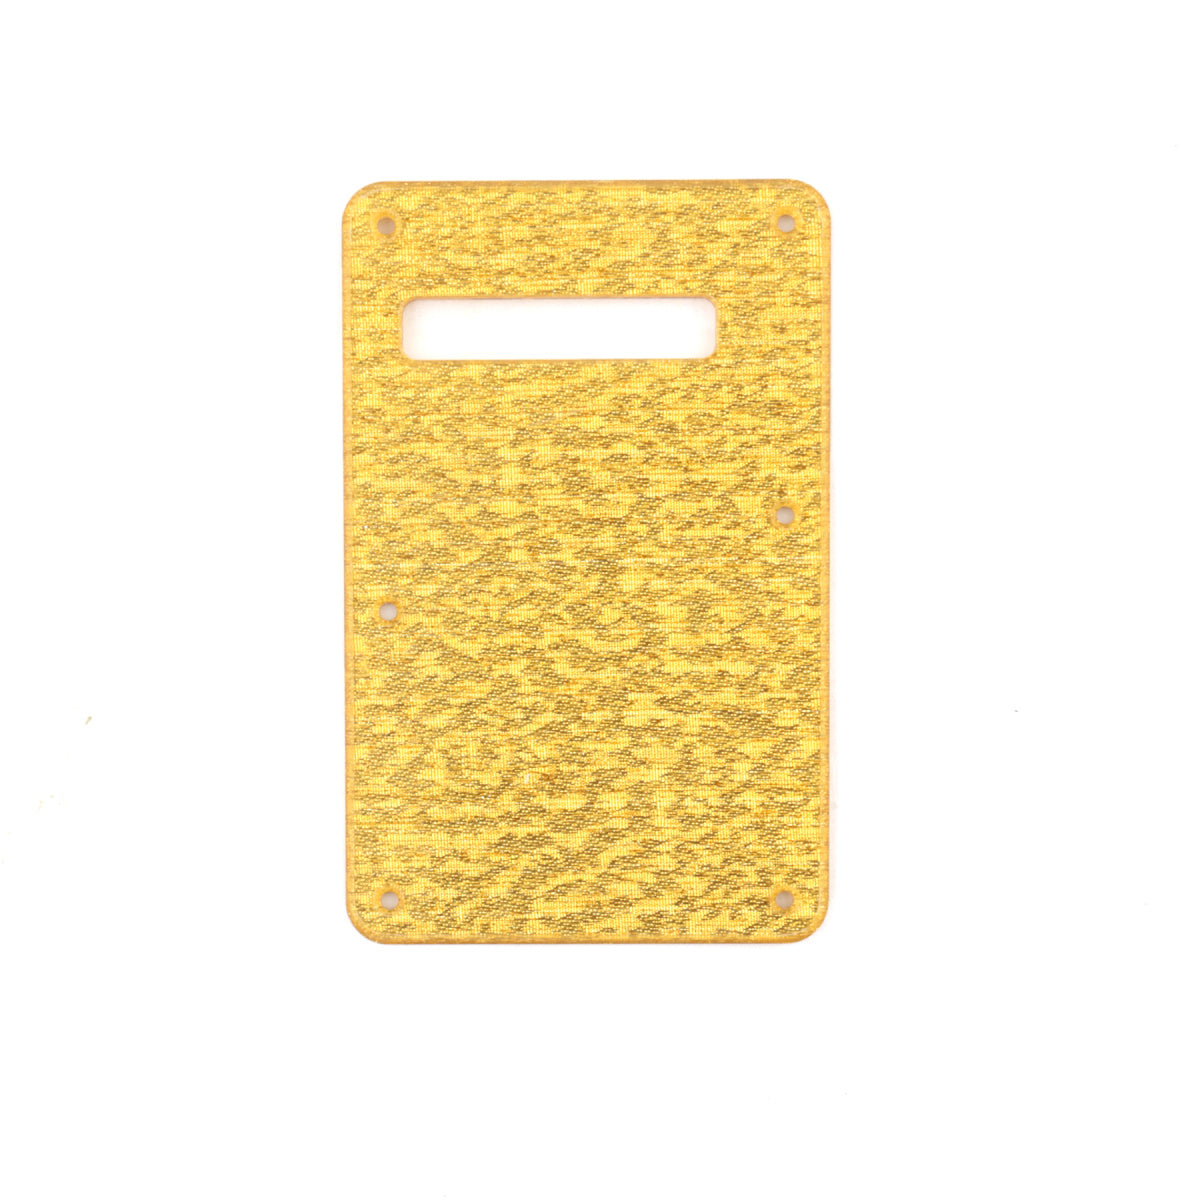 Musiclily Guitar Strat Back Plate for Fender USA/Mexican  Standard Stratocaster Modern Style, 1Ply Glittering Gold